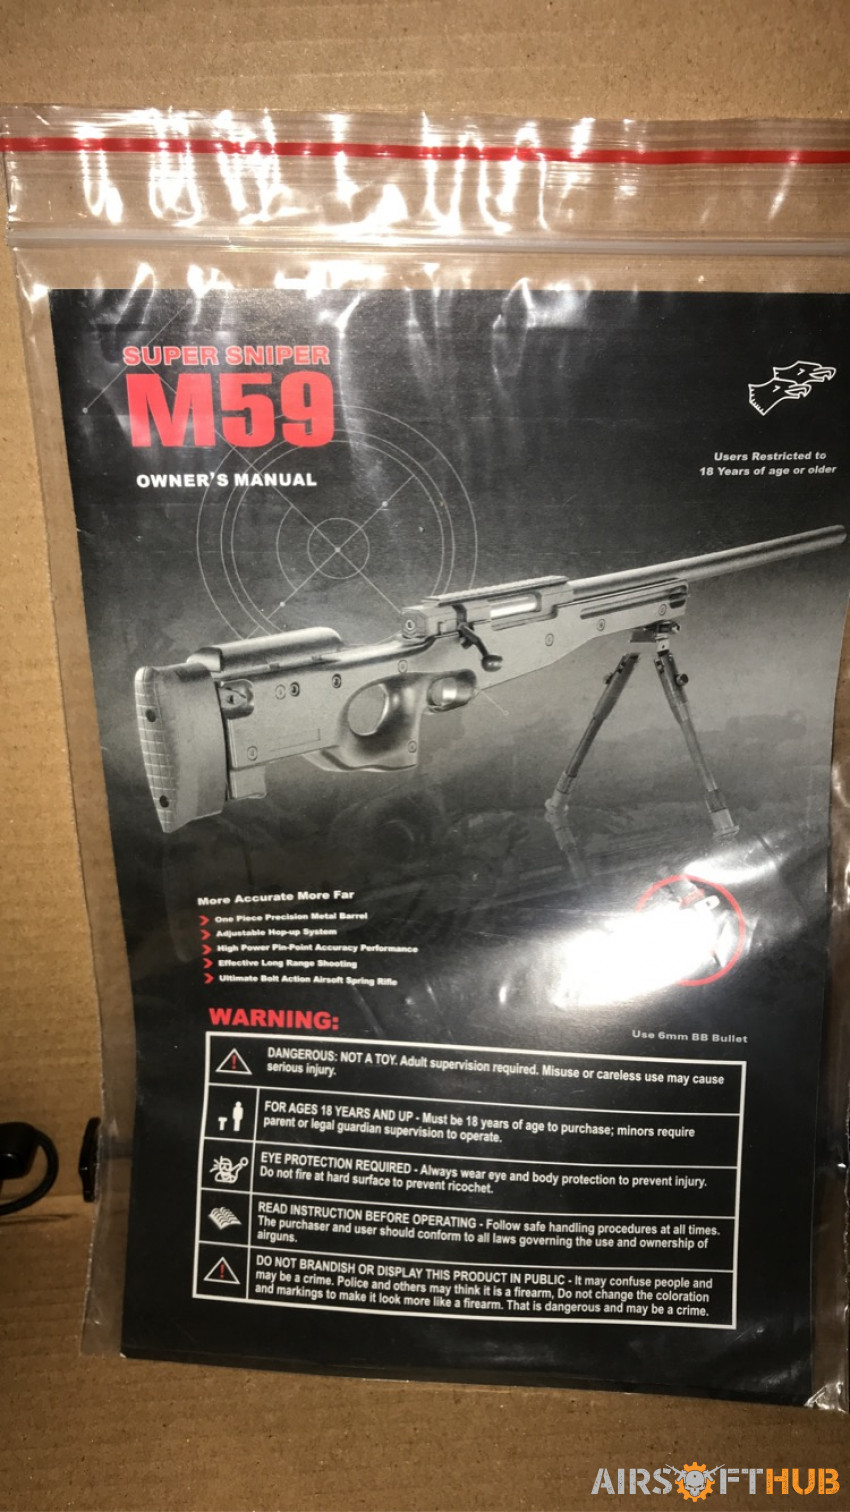 Airsoft Sniper 380fps - Used airsoft equipment